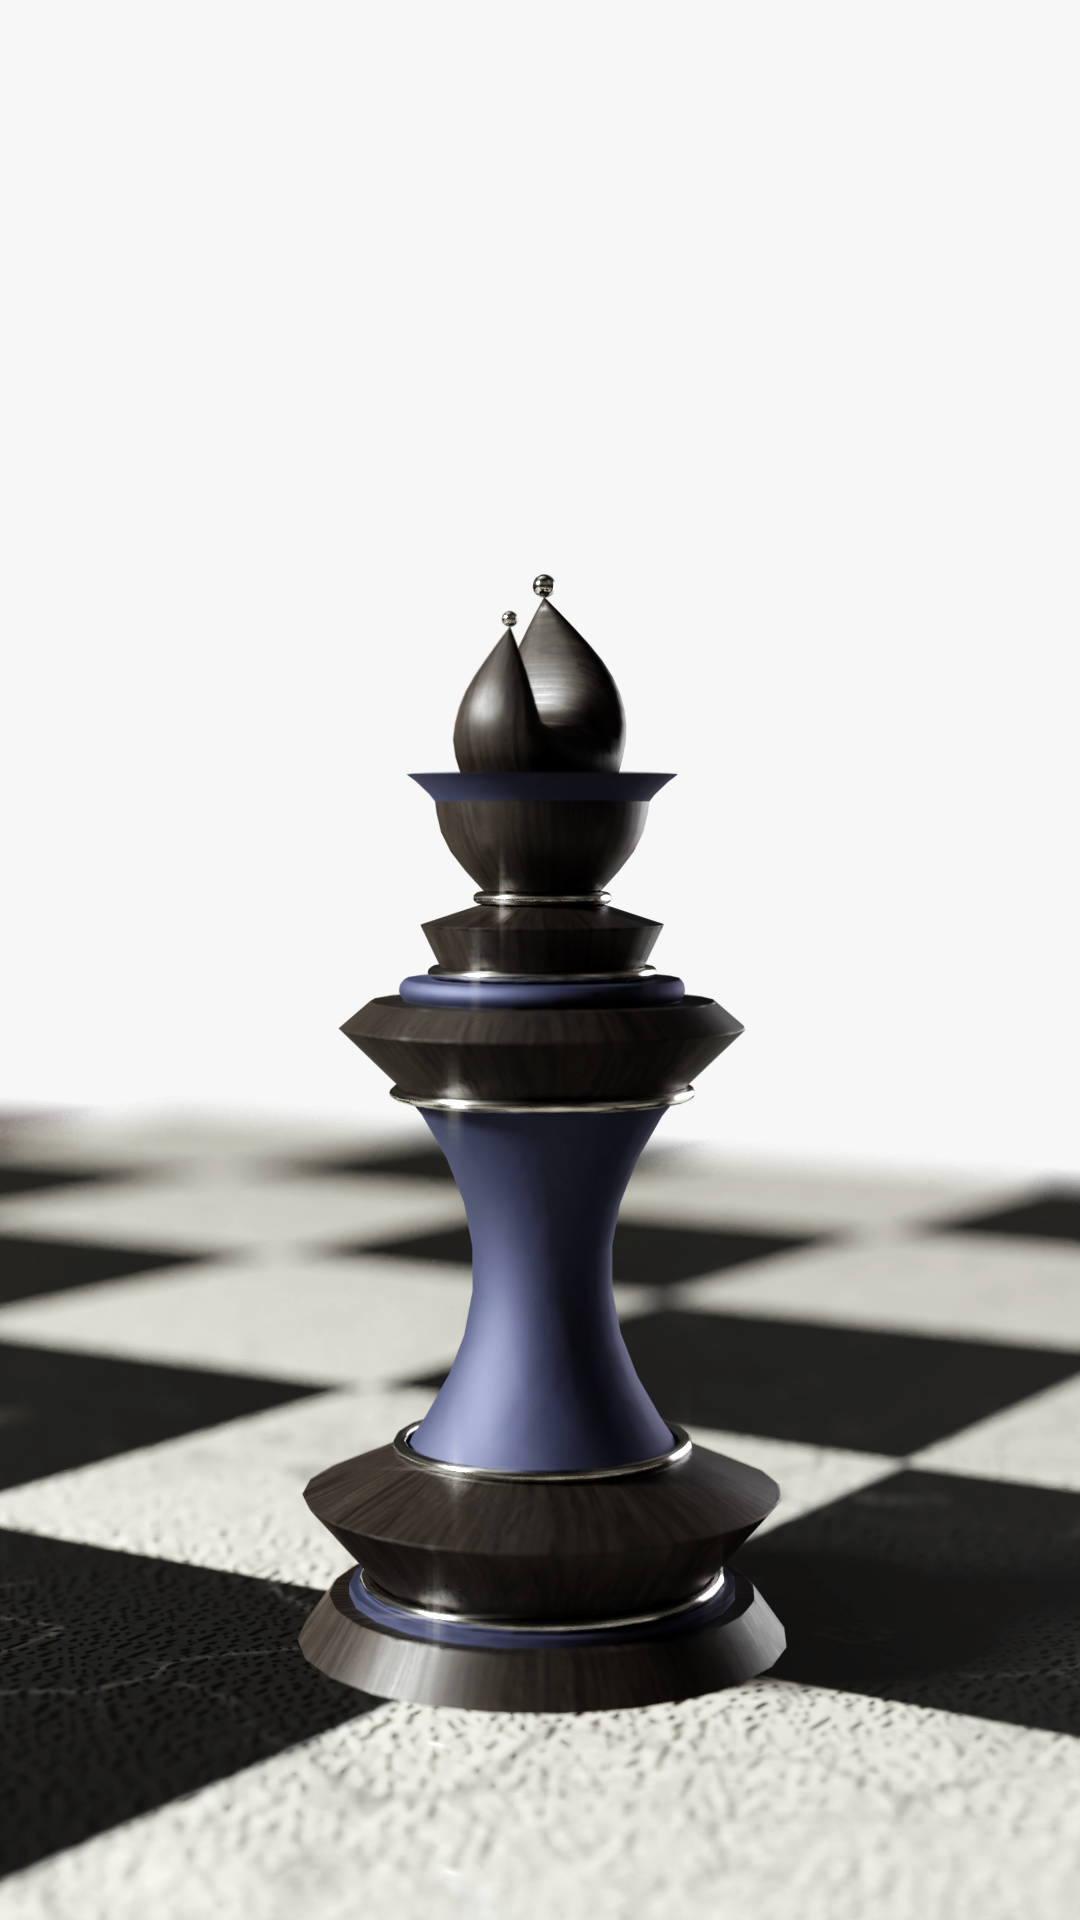 Group Of Chess Pieces Stand On A Black Chessboard Background, 3d Rendering  Fight Chess Pieces King Chess At Center With Chess Piece In The Back  Business Figh, Hd Photography Photo Background Image